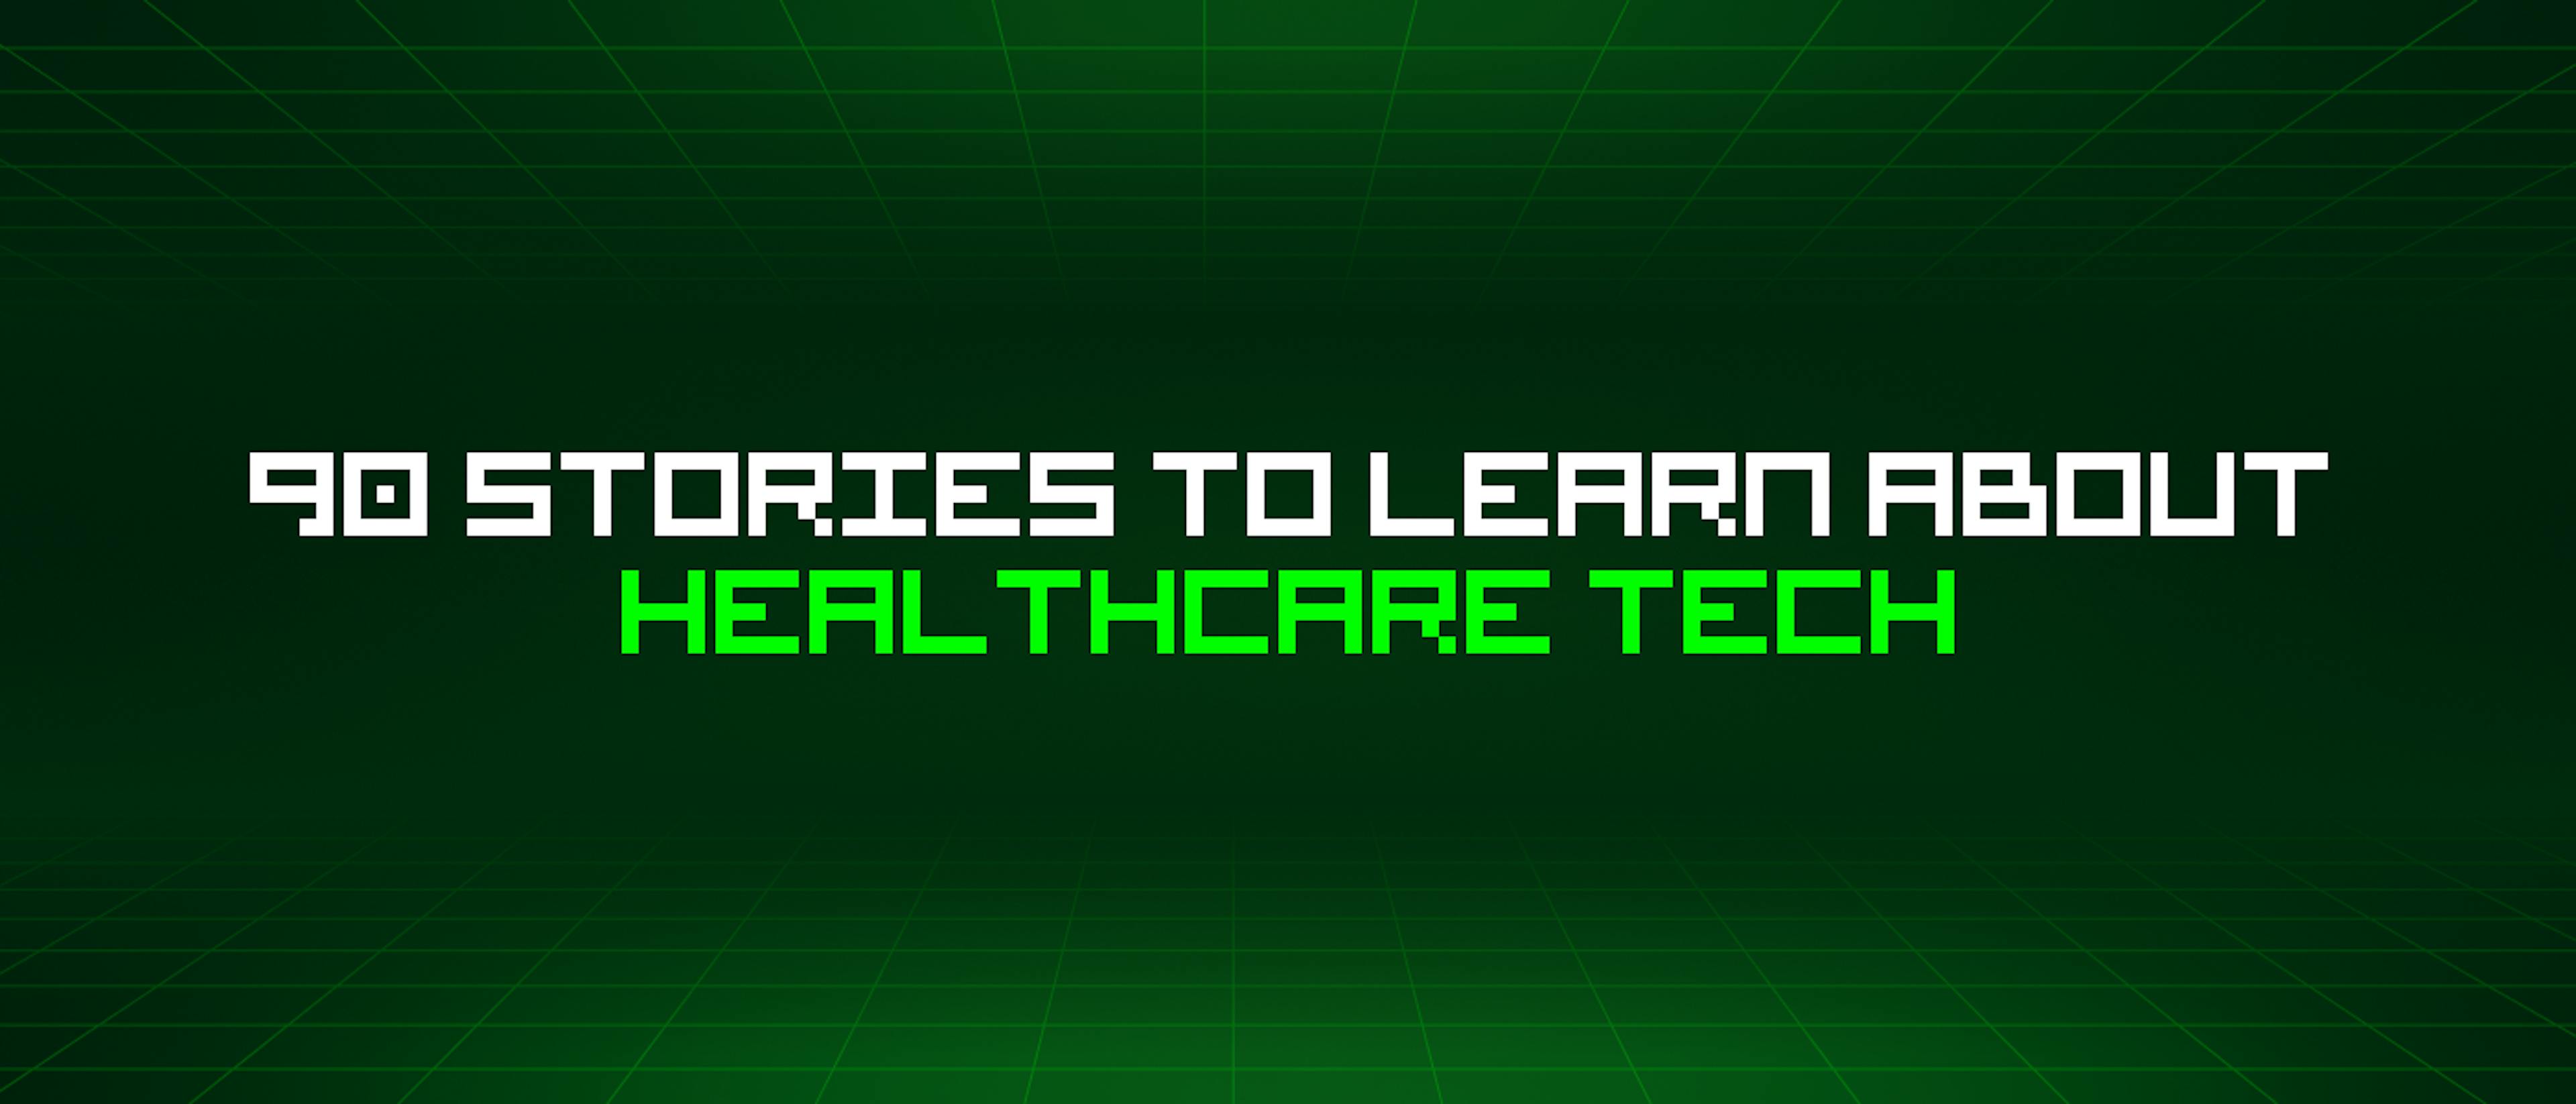 featured image - 90 Stories To Learn About Healthcare Tech